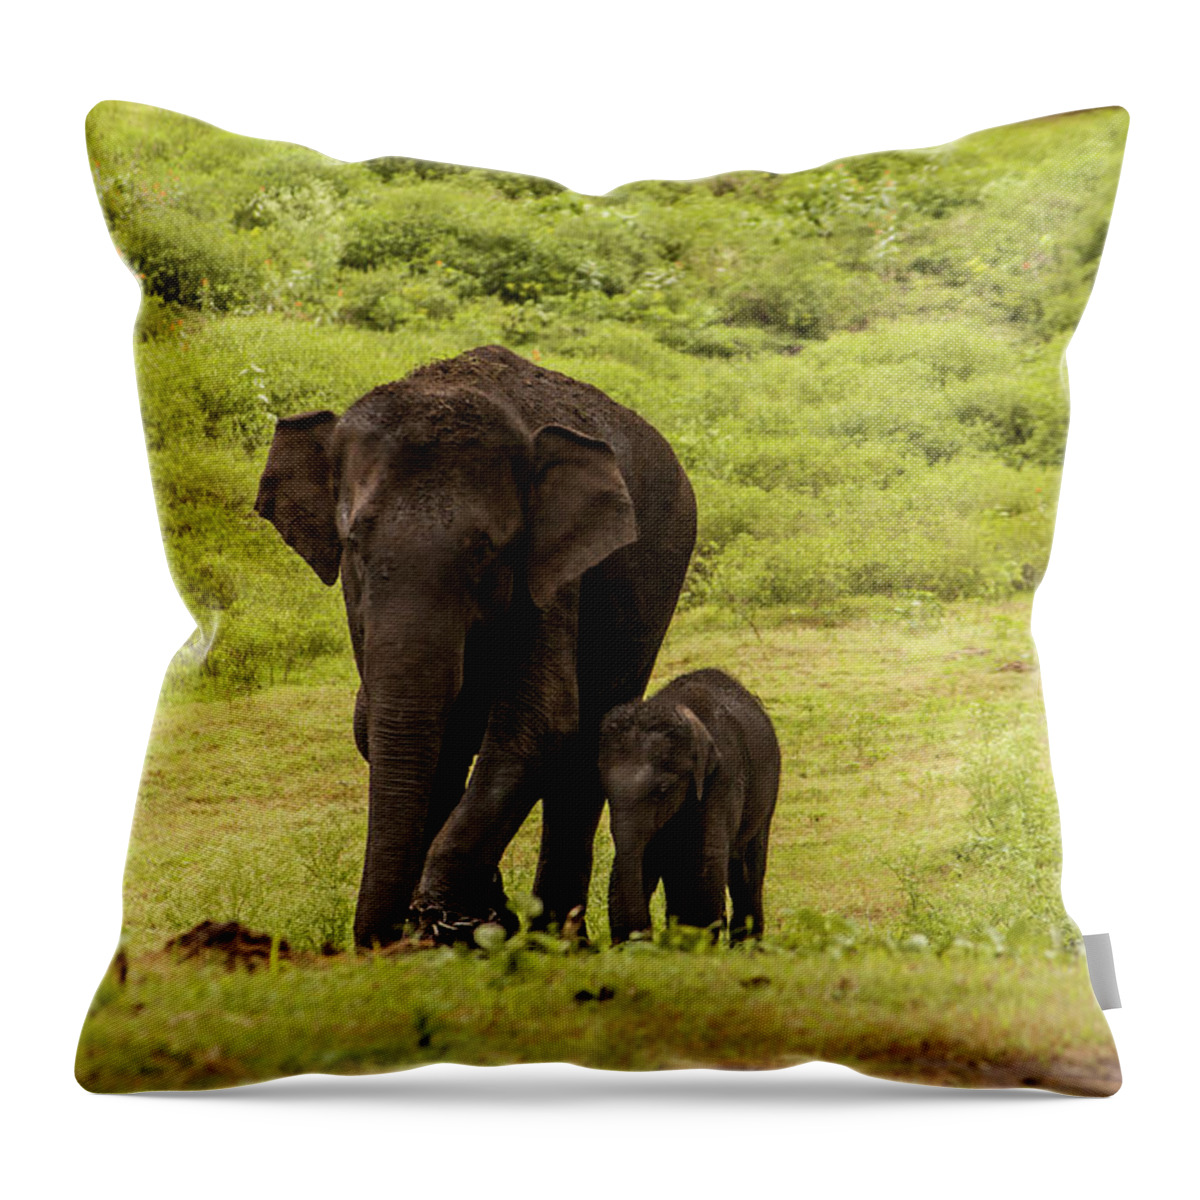 Nagarhole Throw Pillow featuring the photograph Two Elephants Mother And Baby In Green by Abhinav Mathur